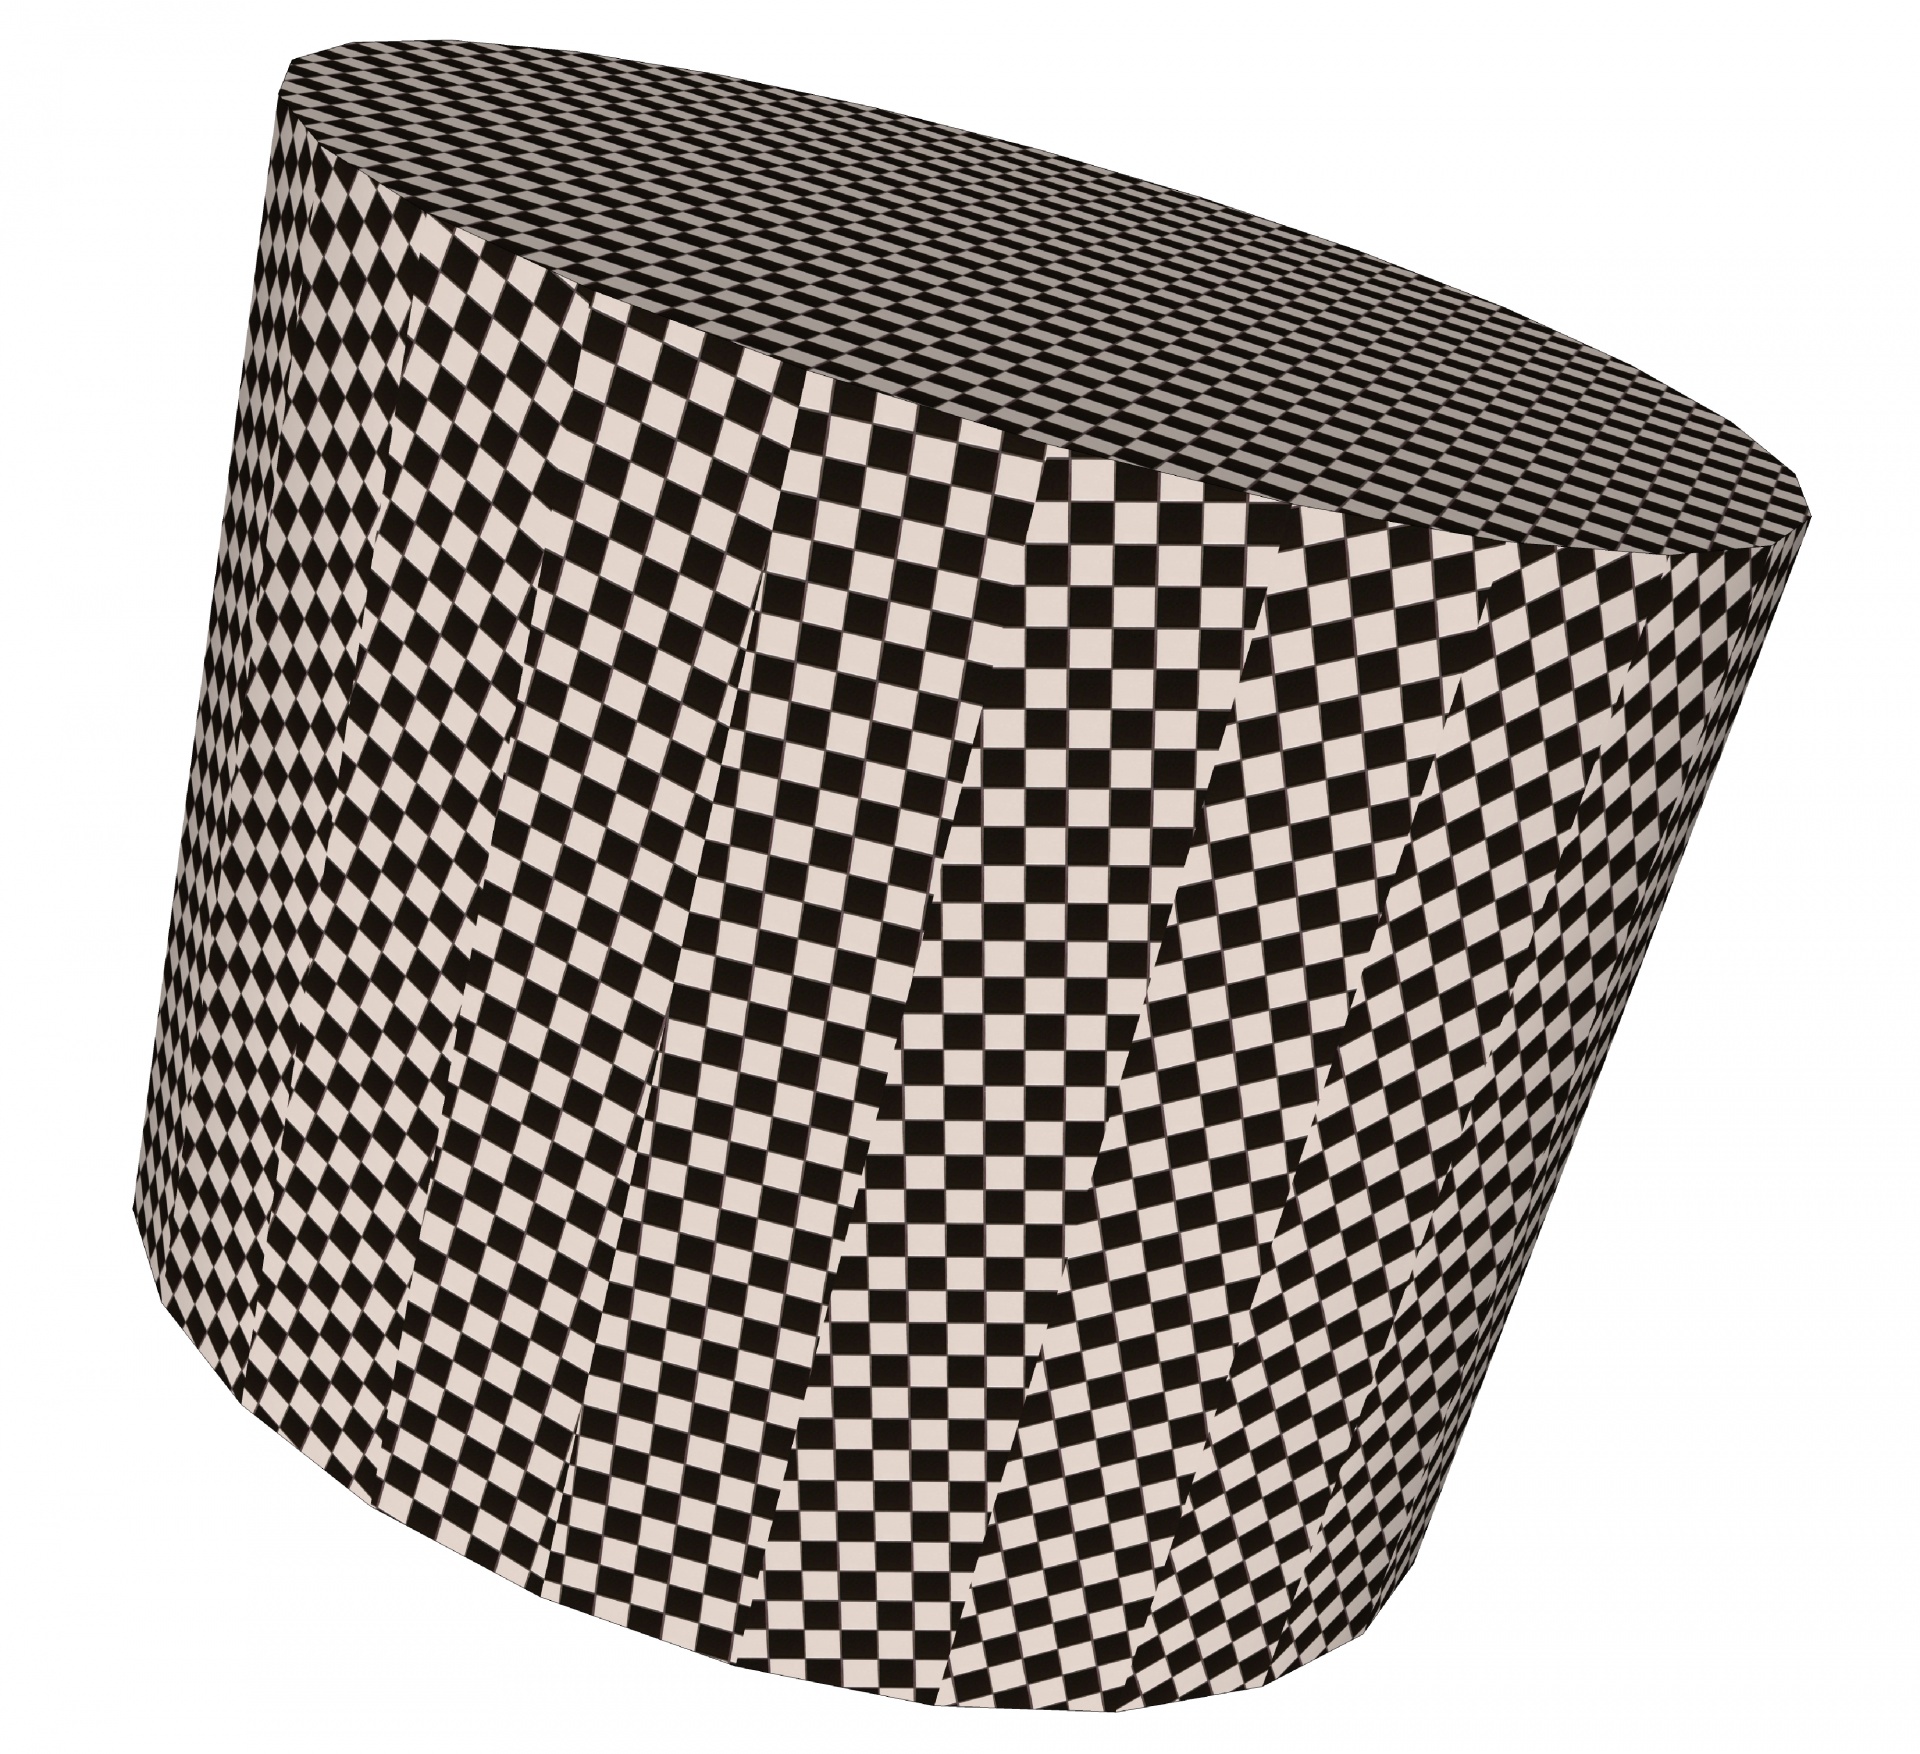 3d cylinder with checkerboard body on white